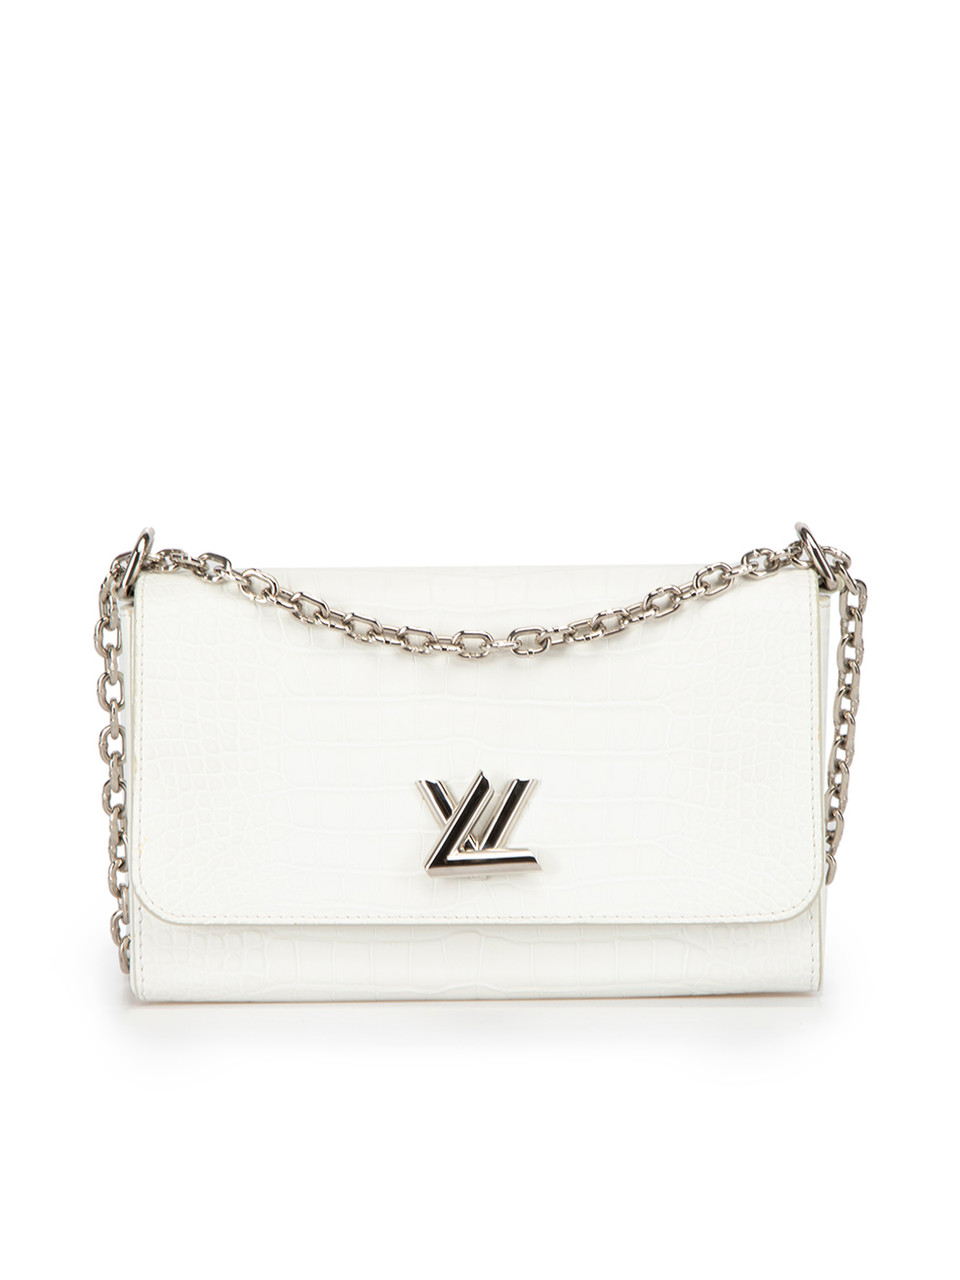 Louis Vuitton, Bags, Small Leather Louis Vuitton Pouch On Chain